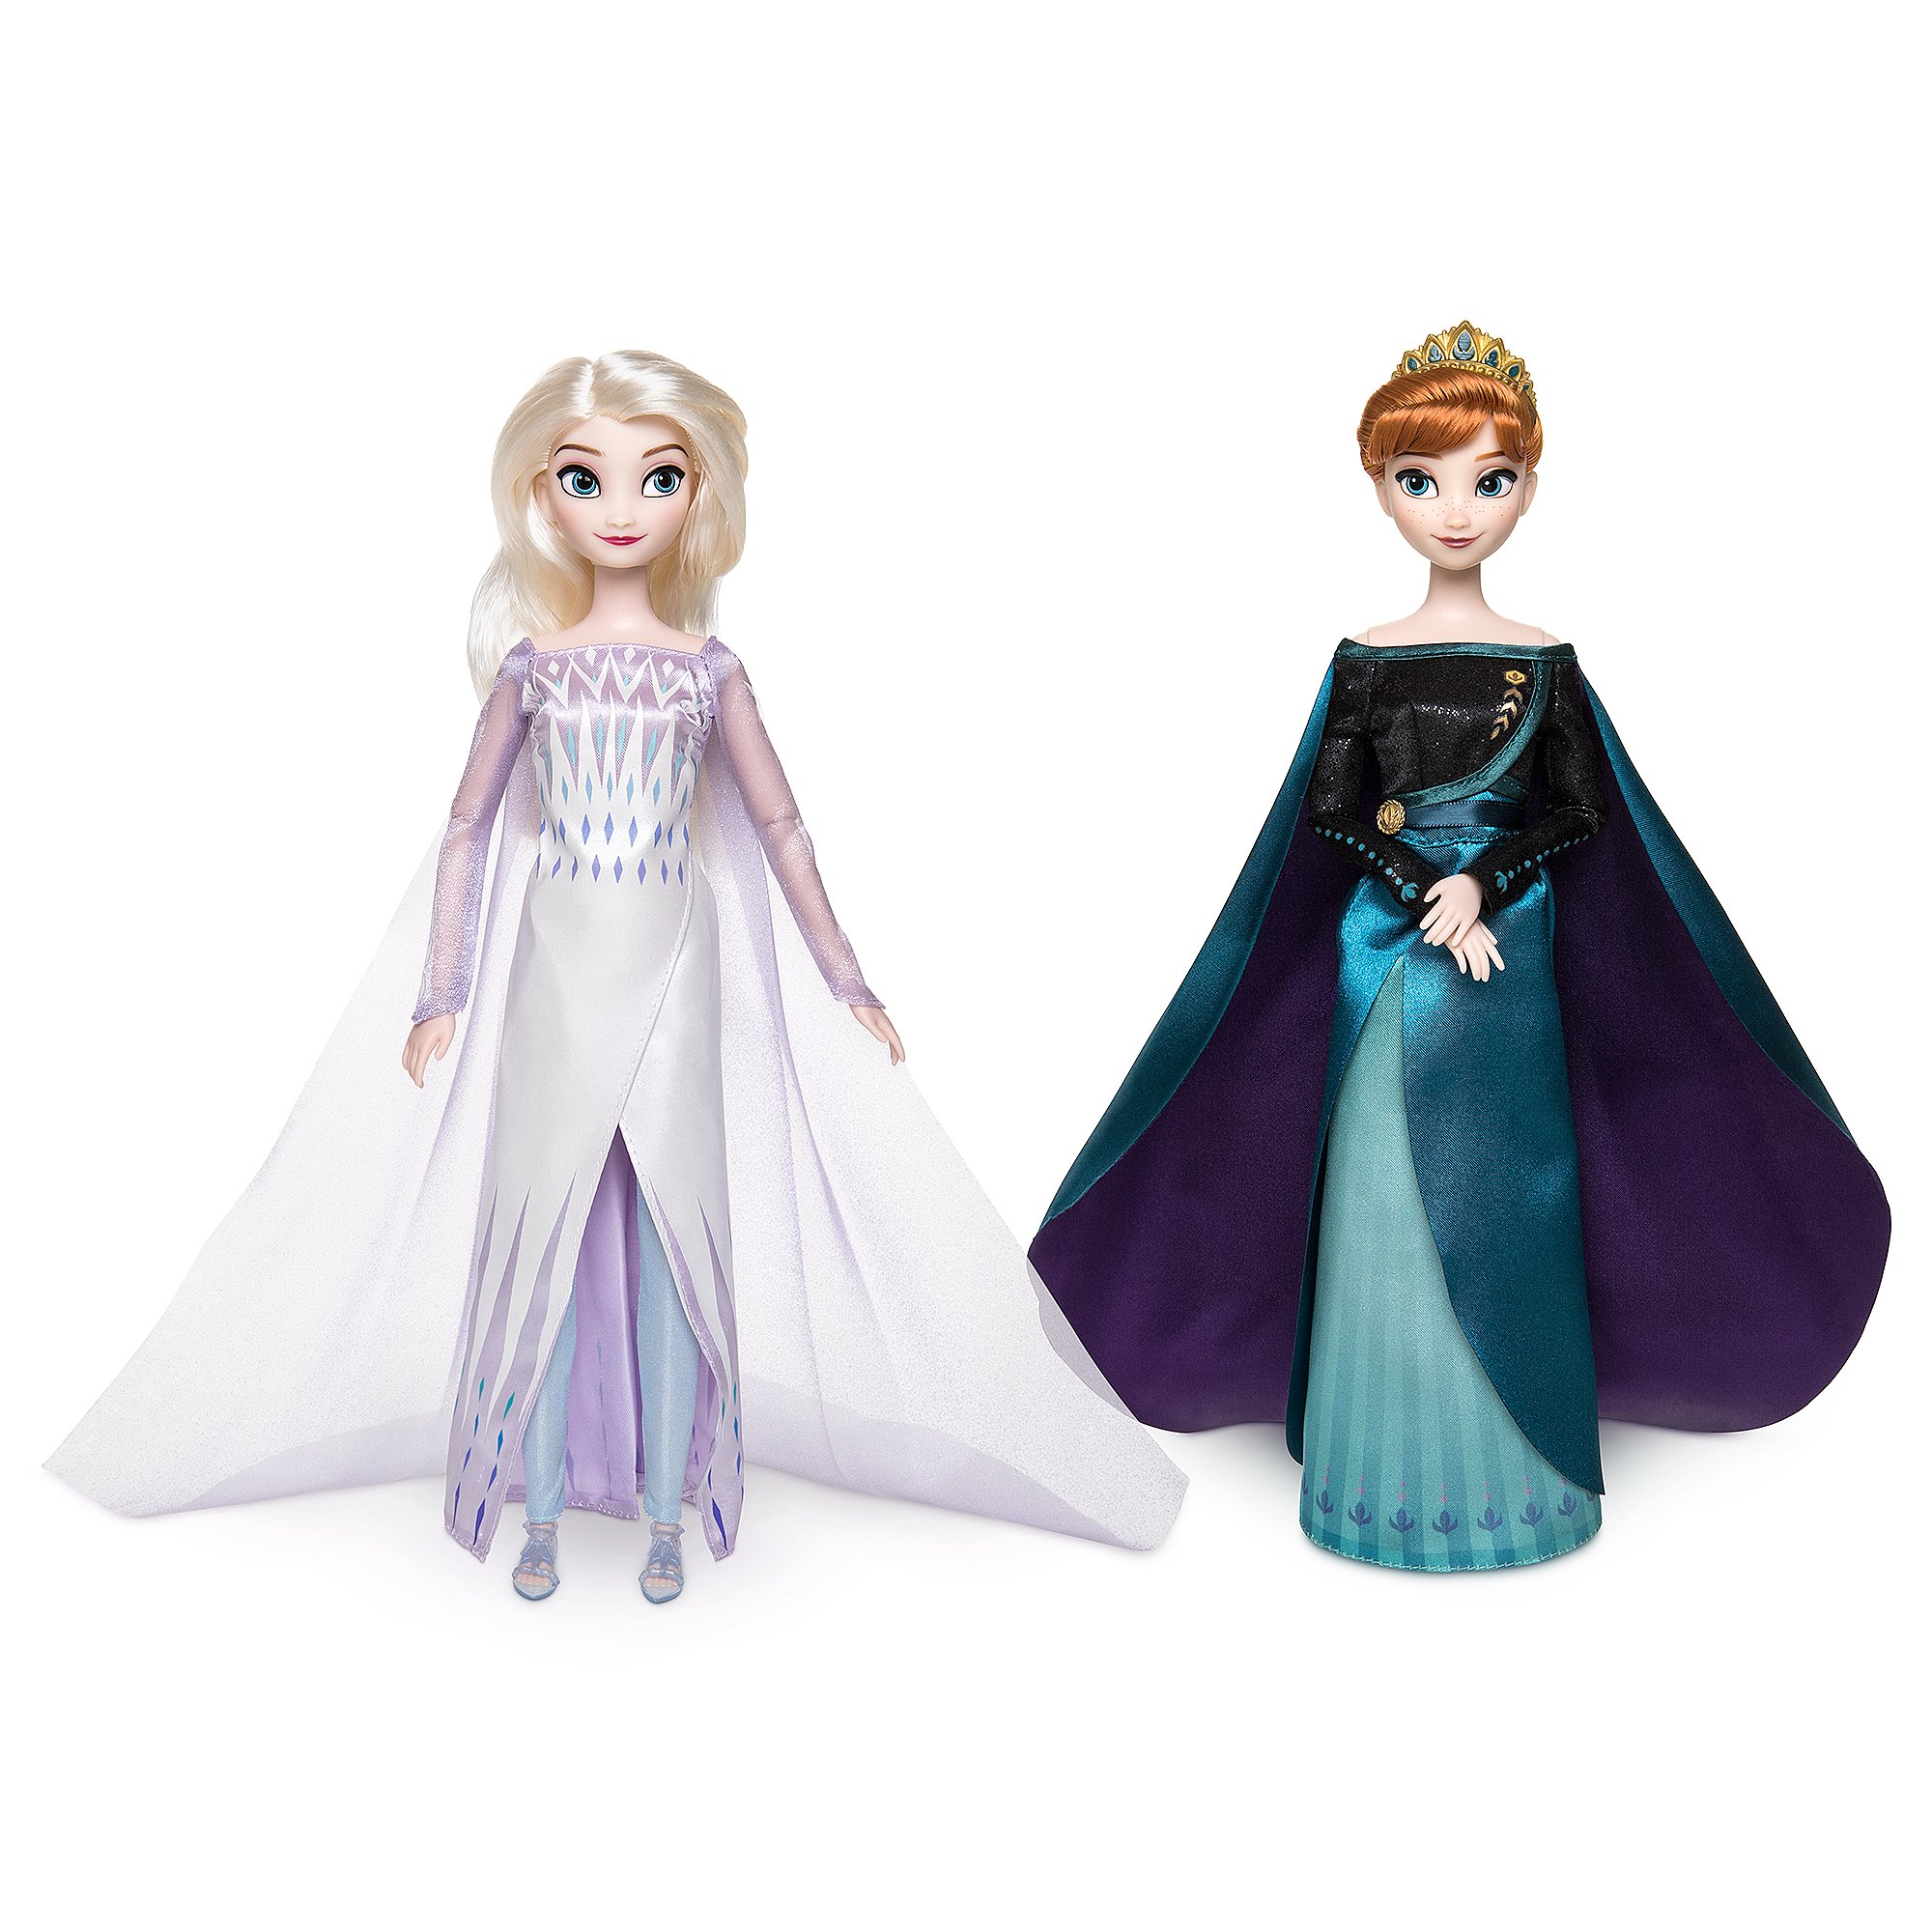 Queen and Snow Queen Classic Doll | Disney Dolls Wiki |